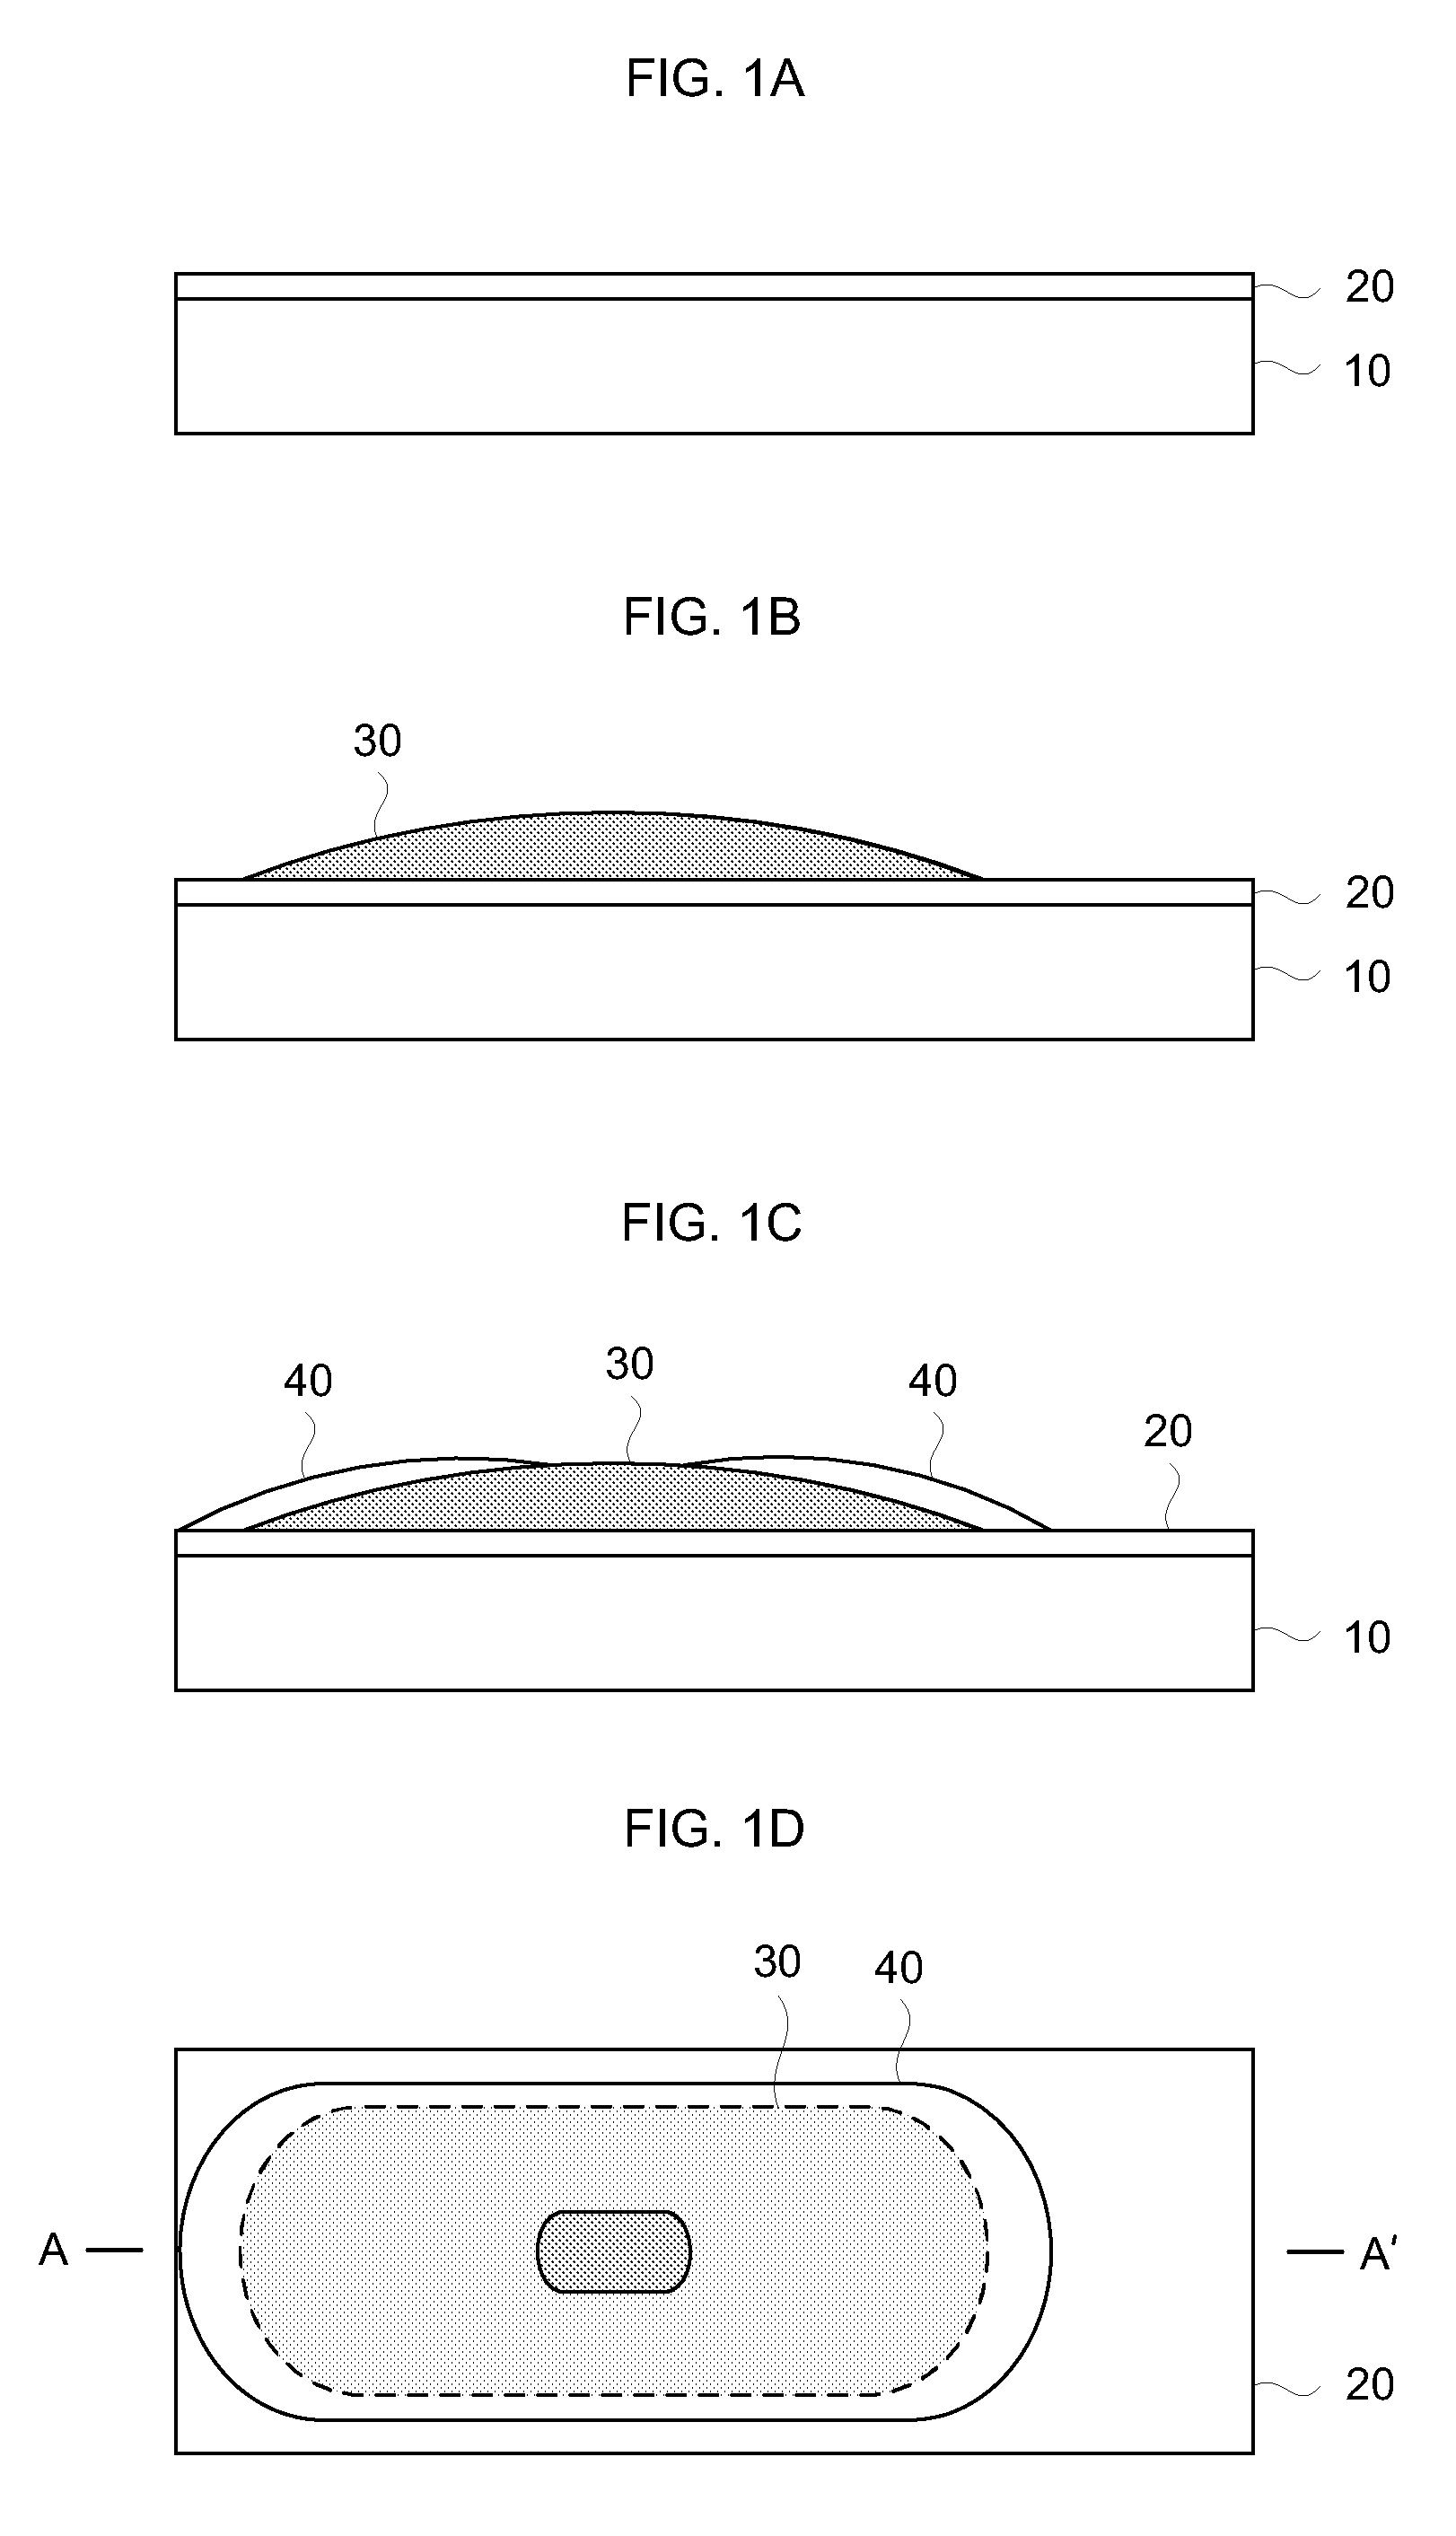 Methods for forming electrically precise capacitors, and structures formed therefrom